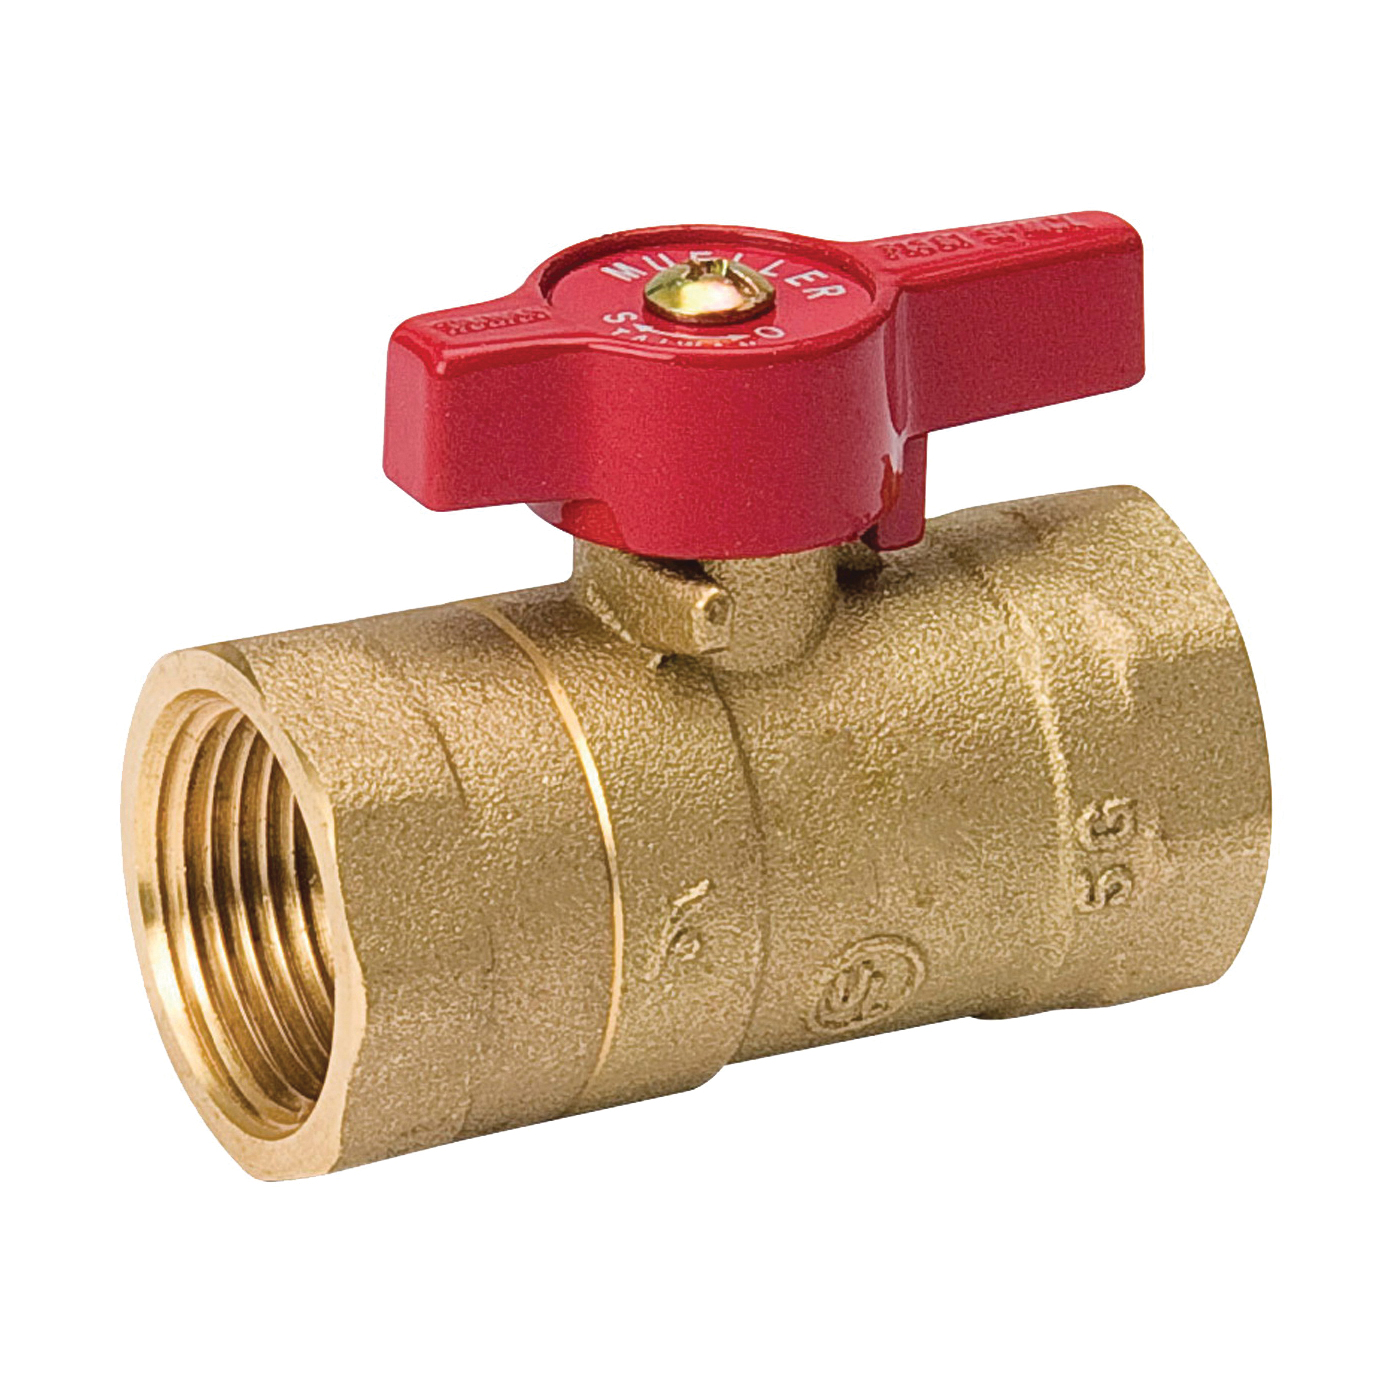 B & K ProLine Series 110-223HC Gas Ball Valve, 1/2 in Connection, FPT, 200 psi Pressure, Manual Actuator, Brass Body - 1